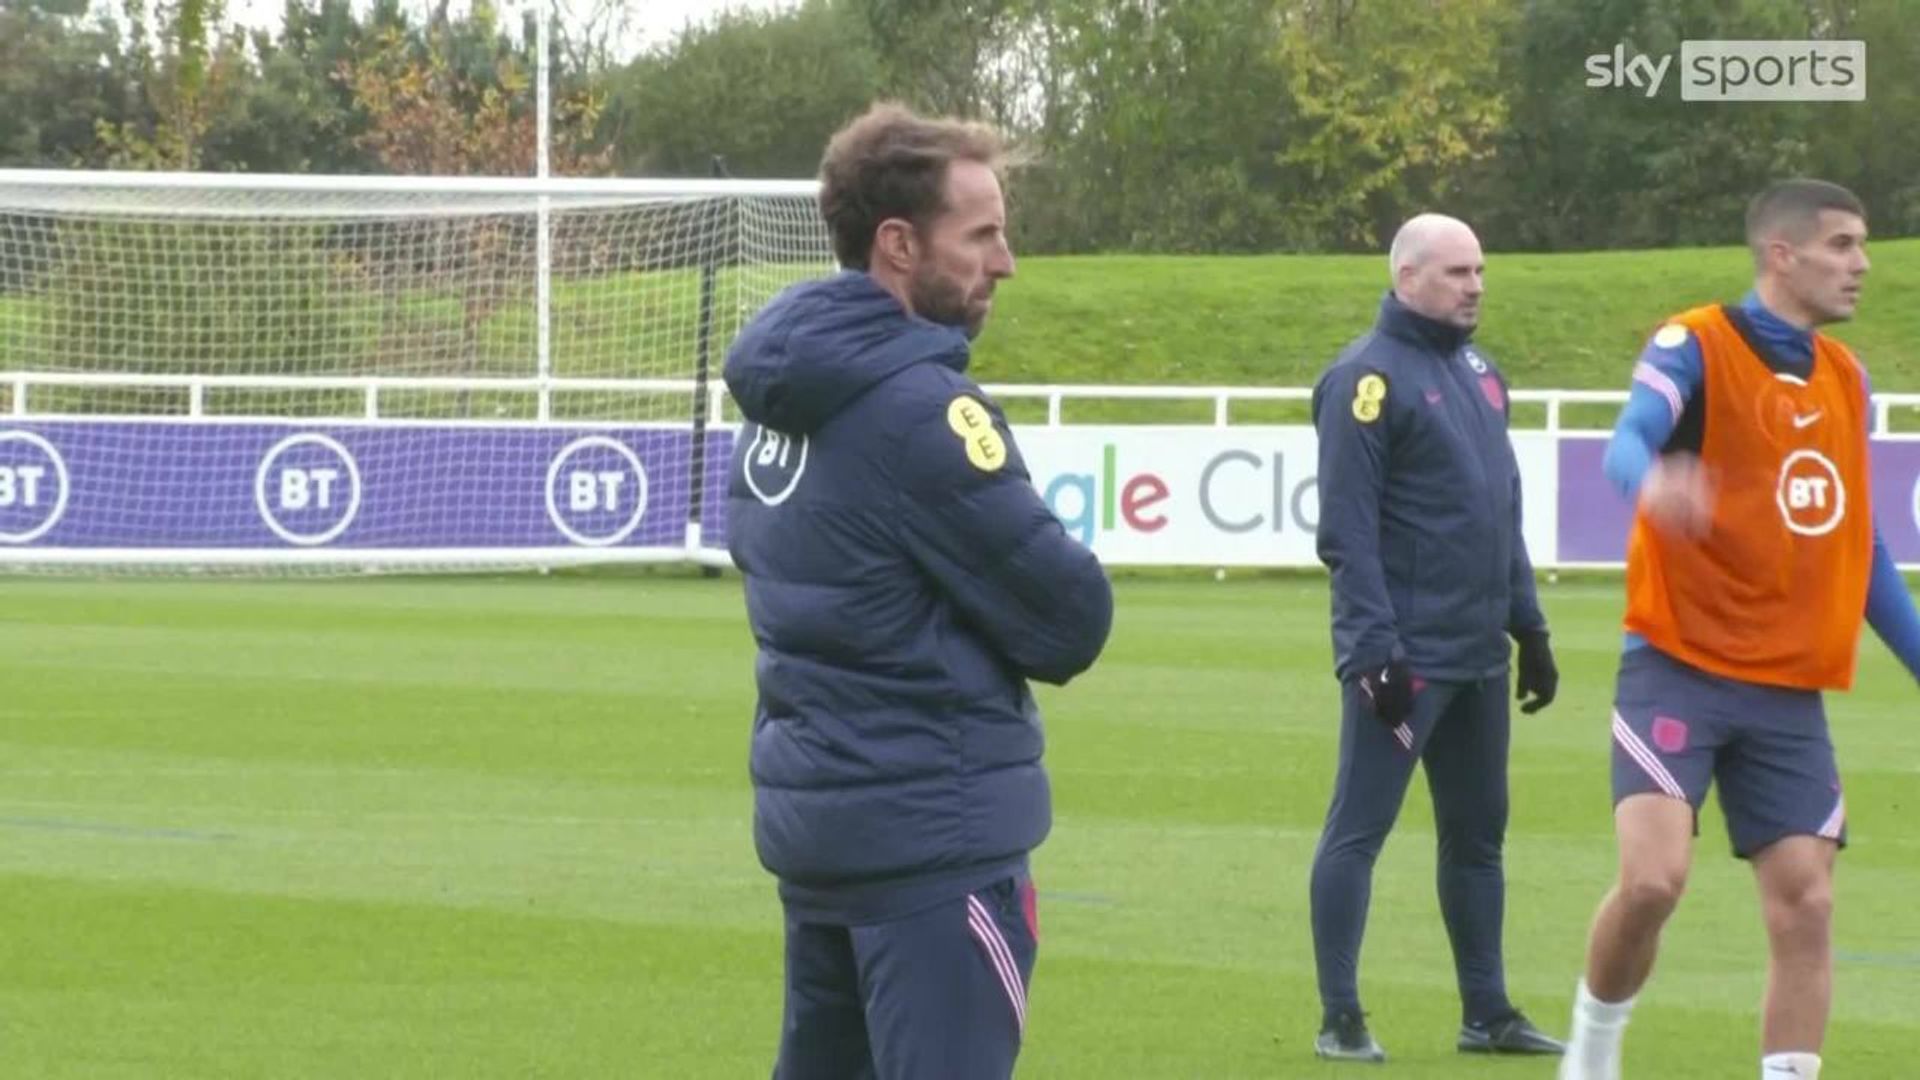 England train ahead of World Cup qualifiers